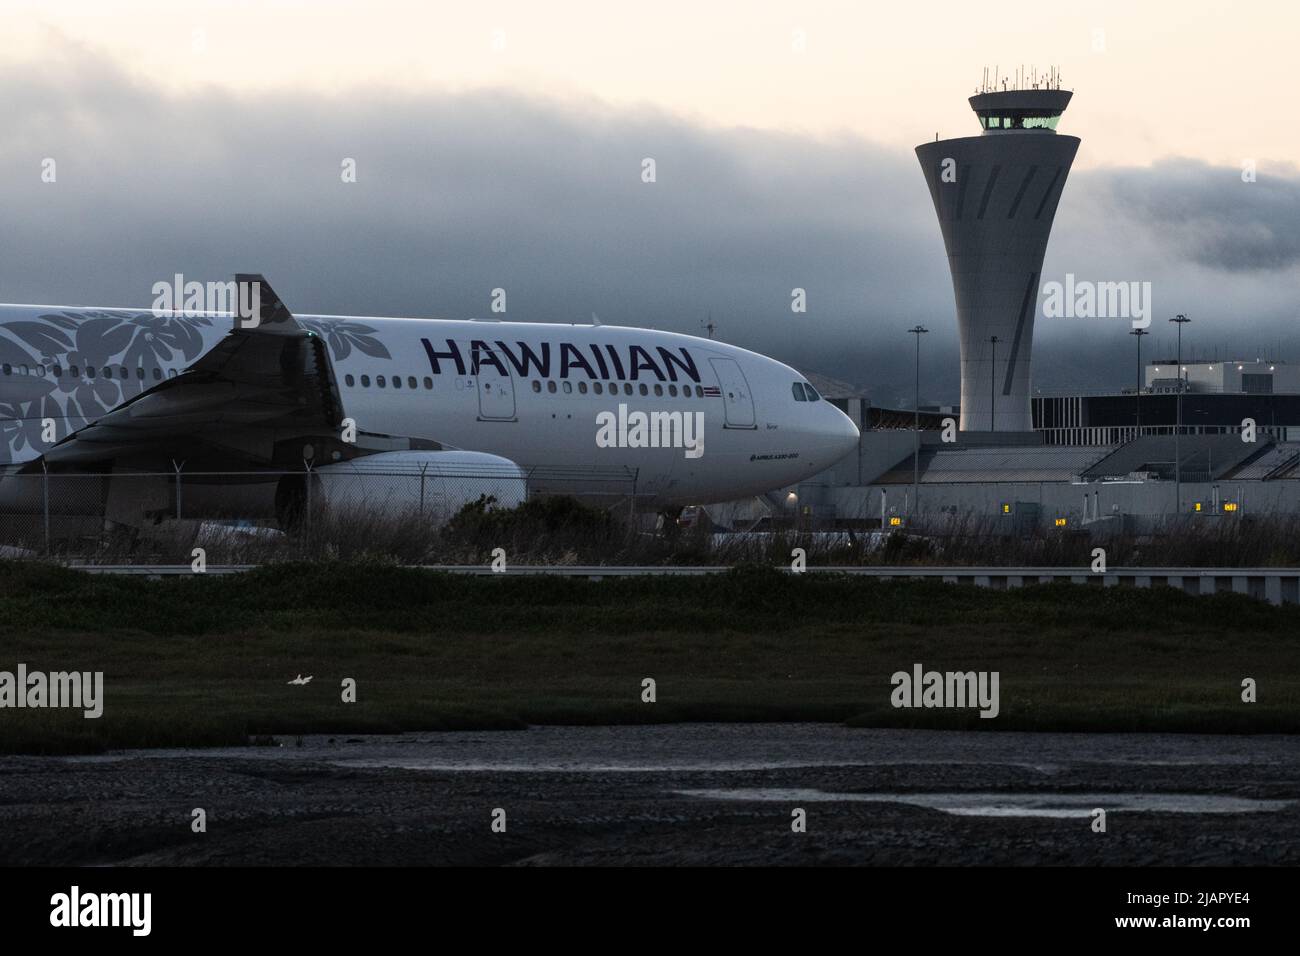 A hawaiian airlines plane in front of the airport traffic control tower at San Francisco international airport in Millbrae, California, USA. Stock Photo